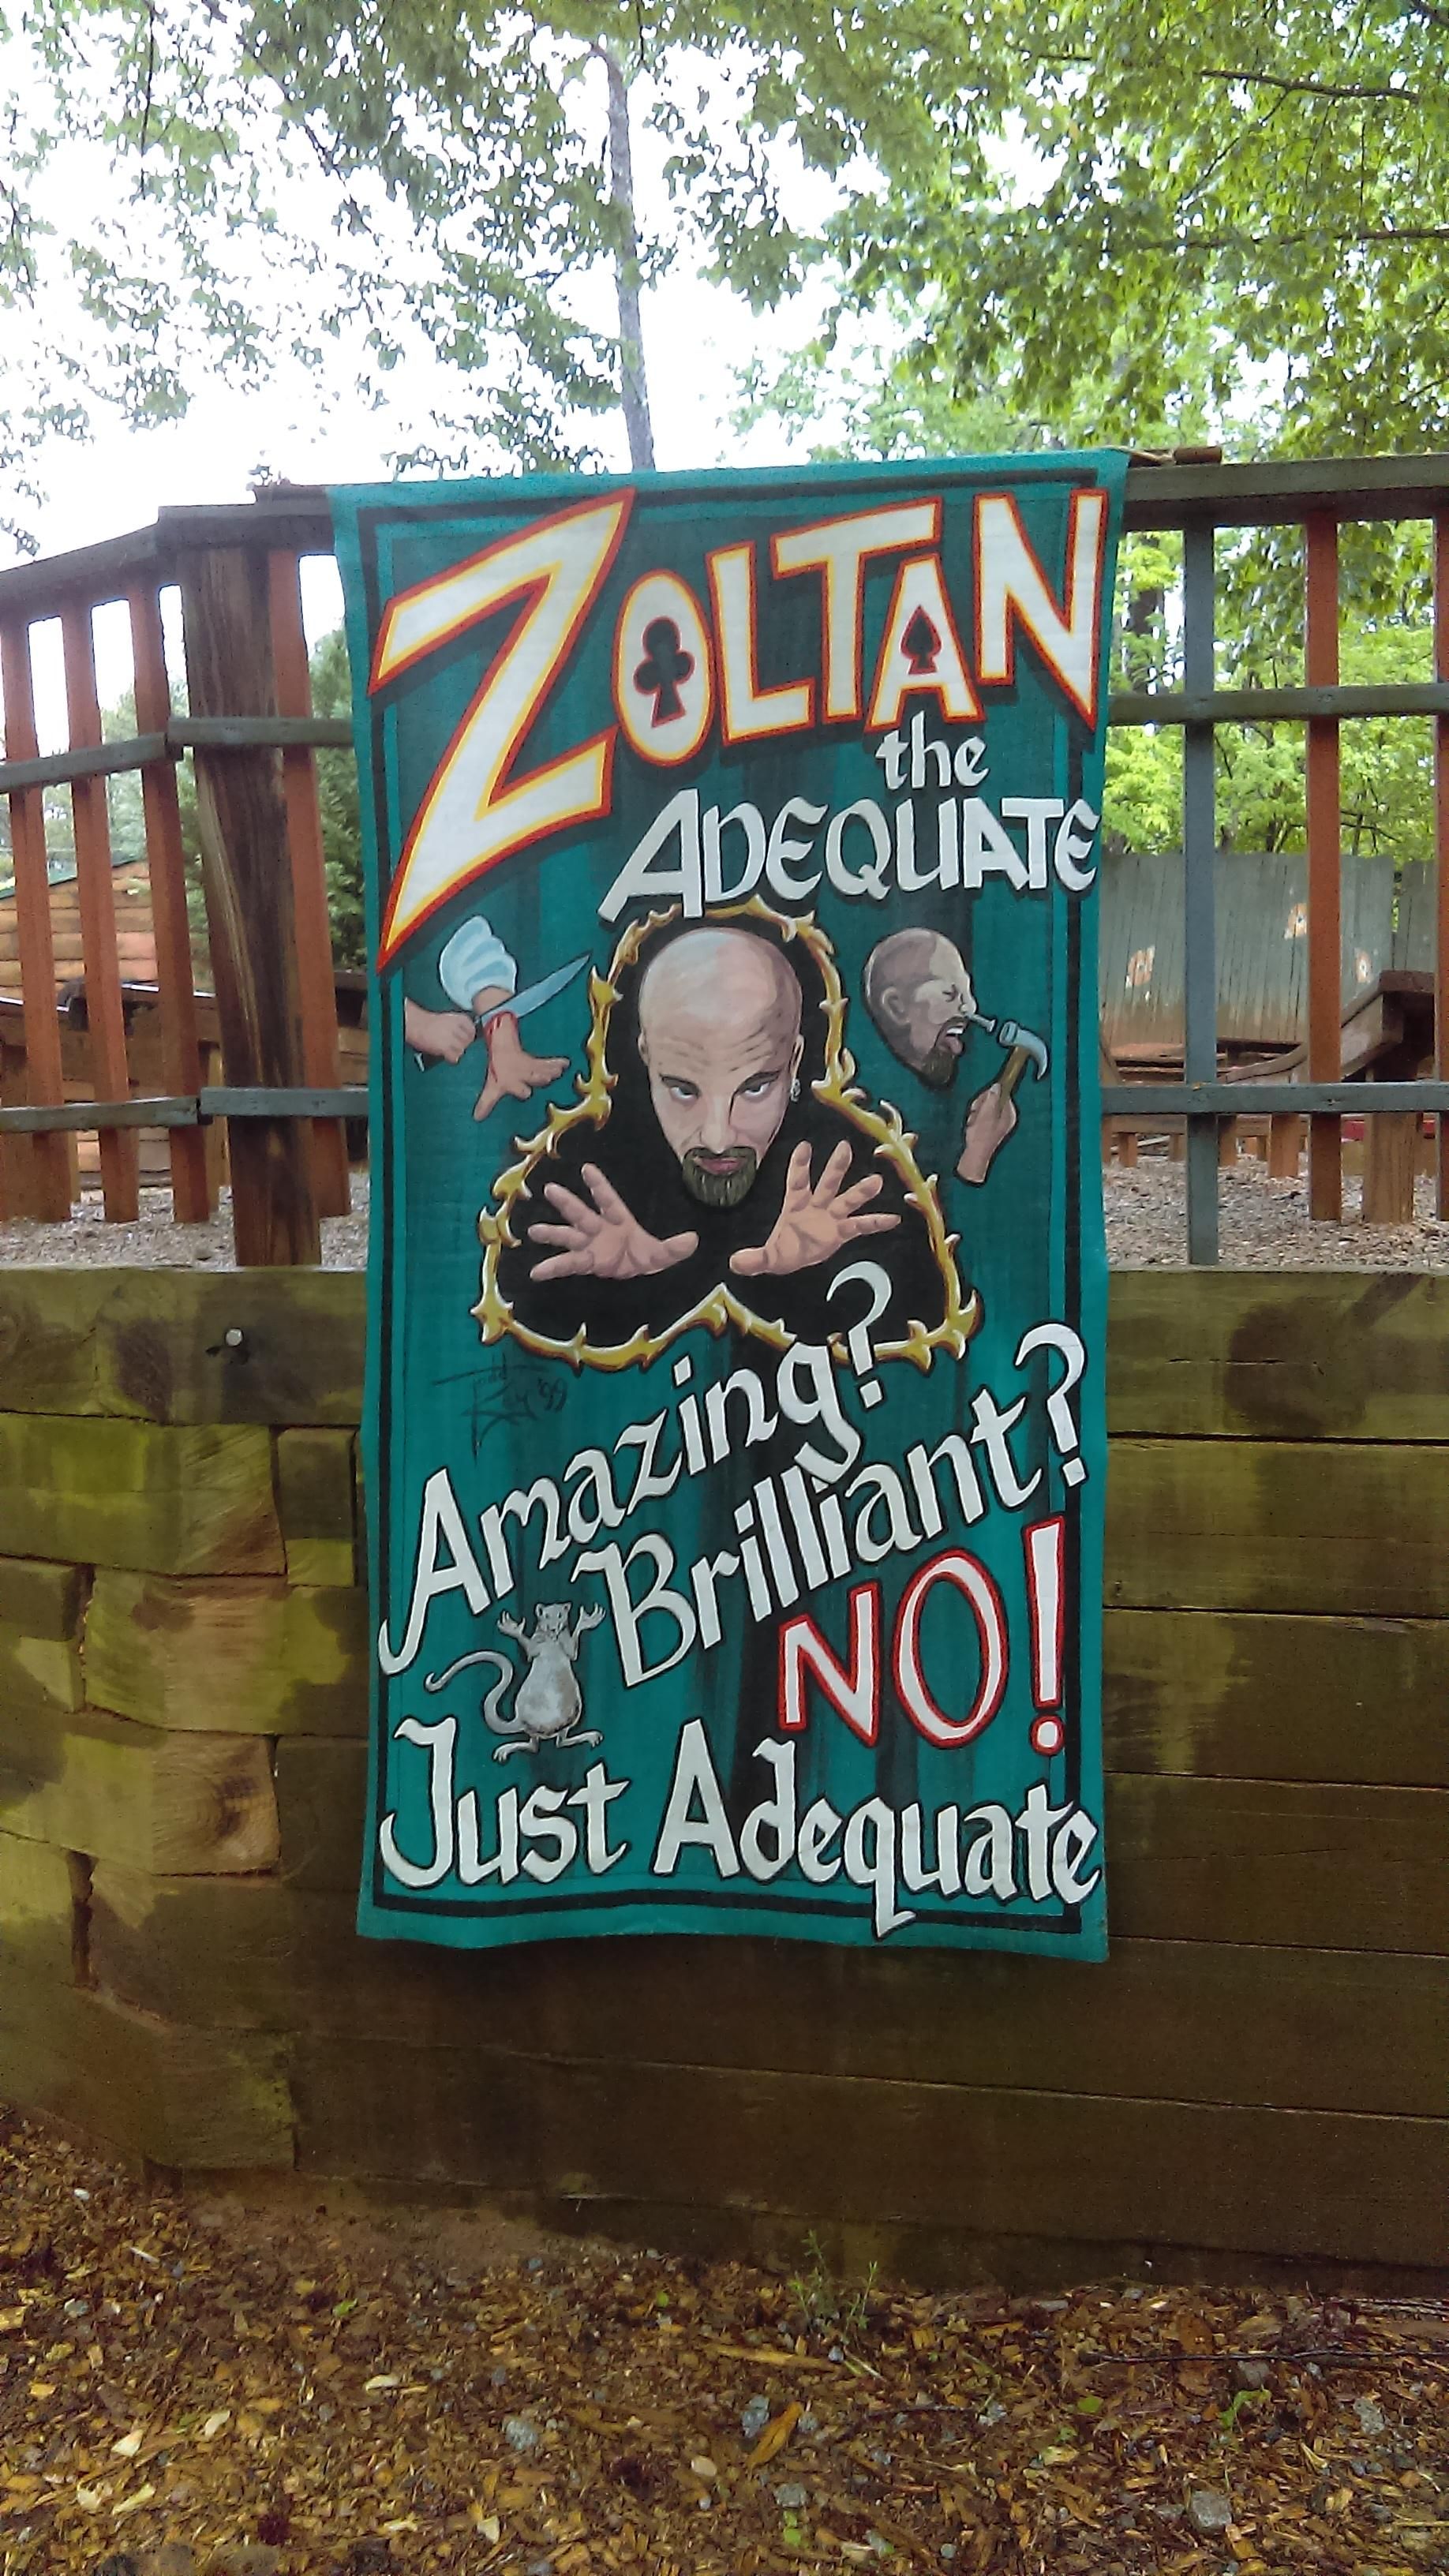 Found a his amazing wizard at a local renaissance festival.